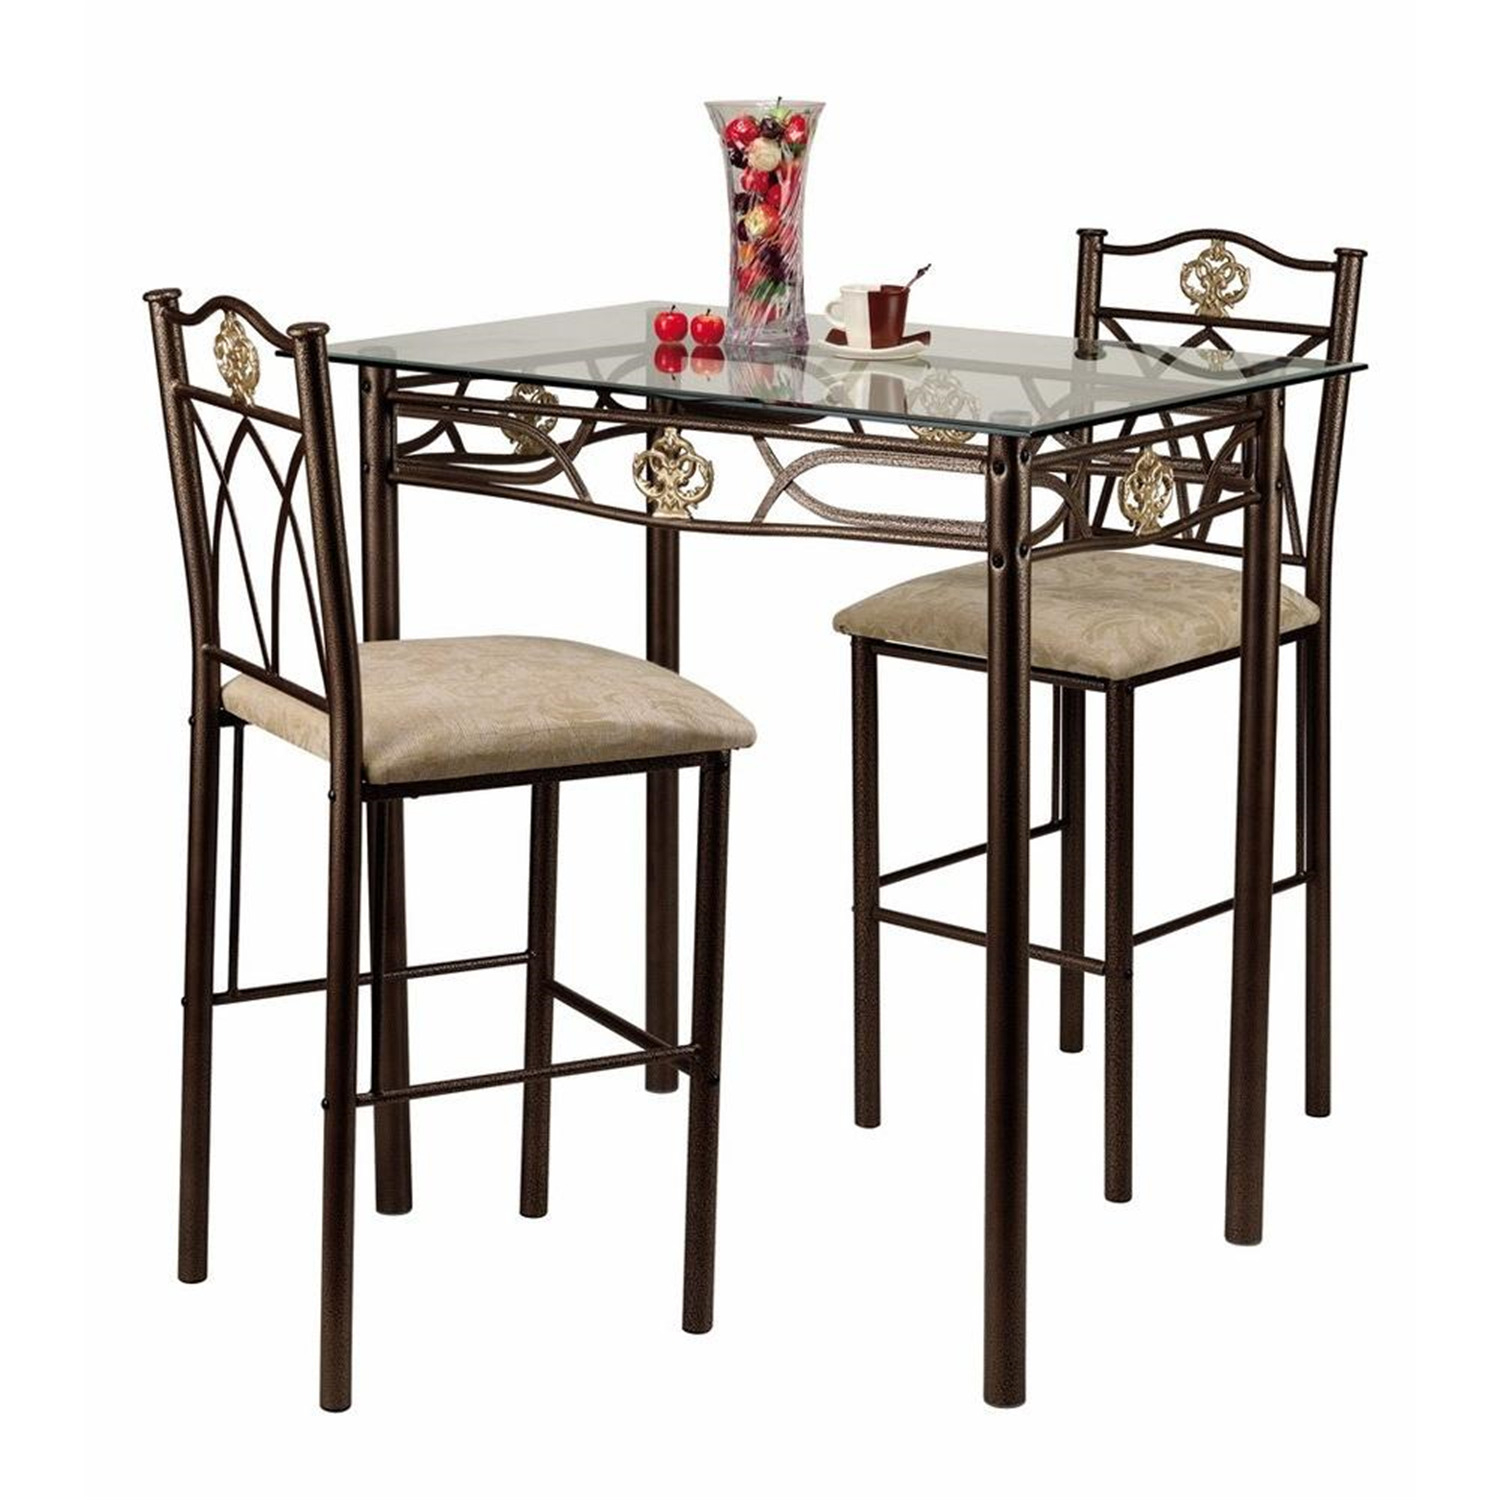 Home Source Industries Crown Bistro 3-Piece Dining Set with Glass Table Top and 2 Chairs